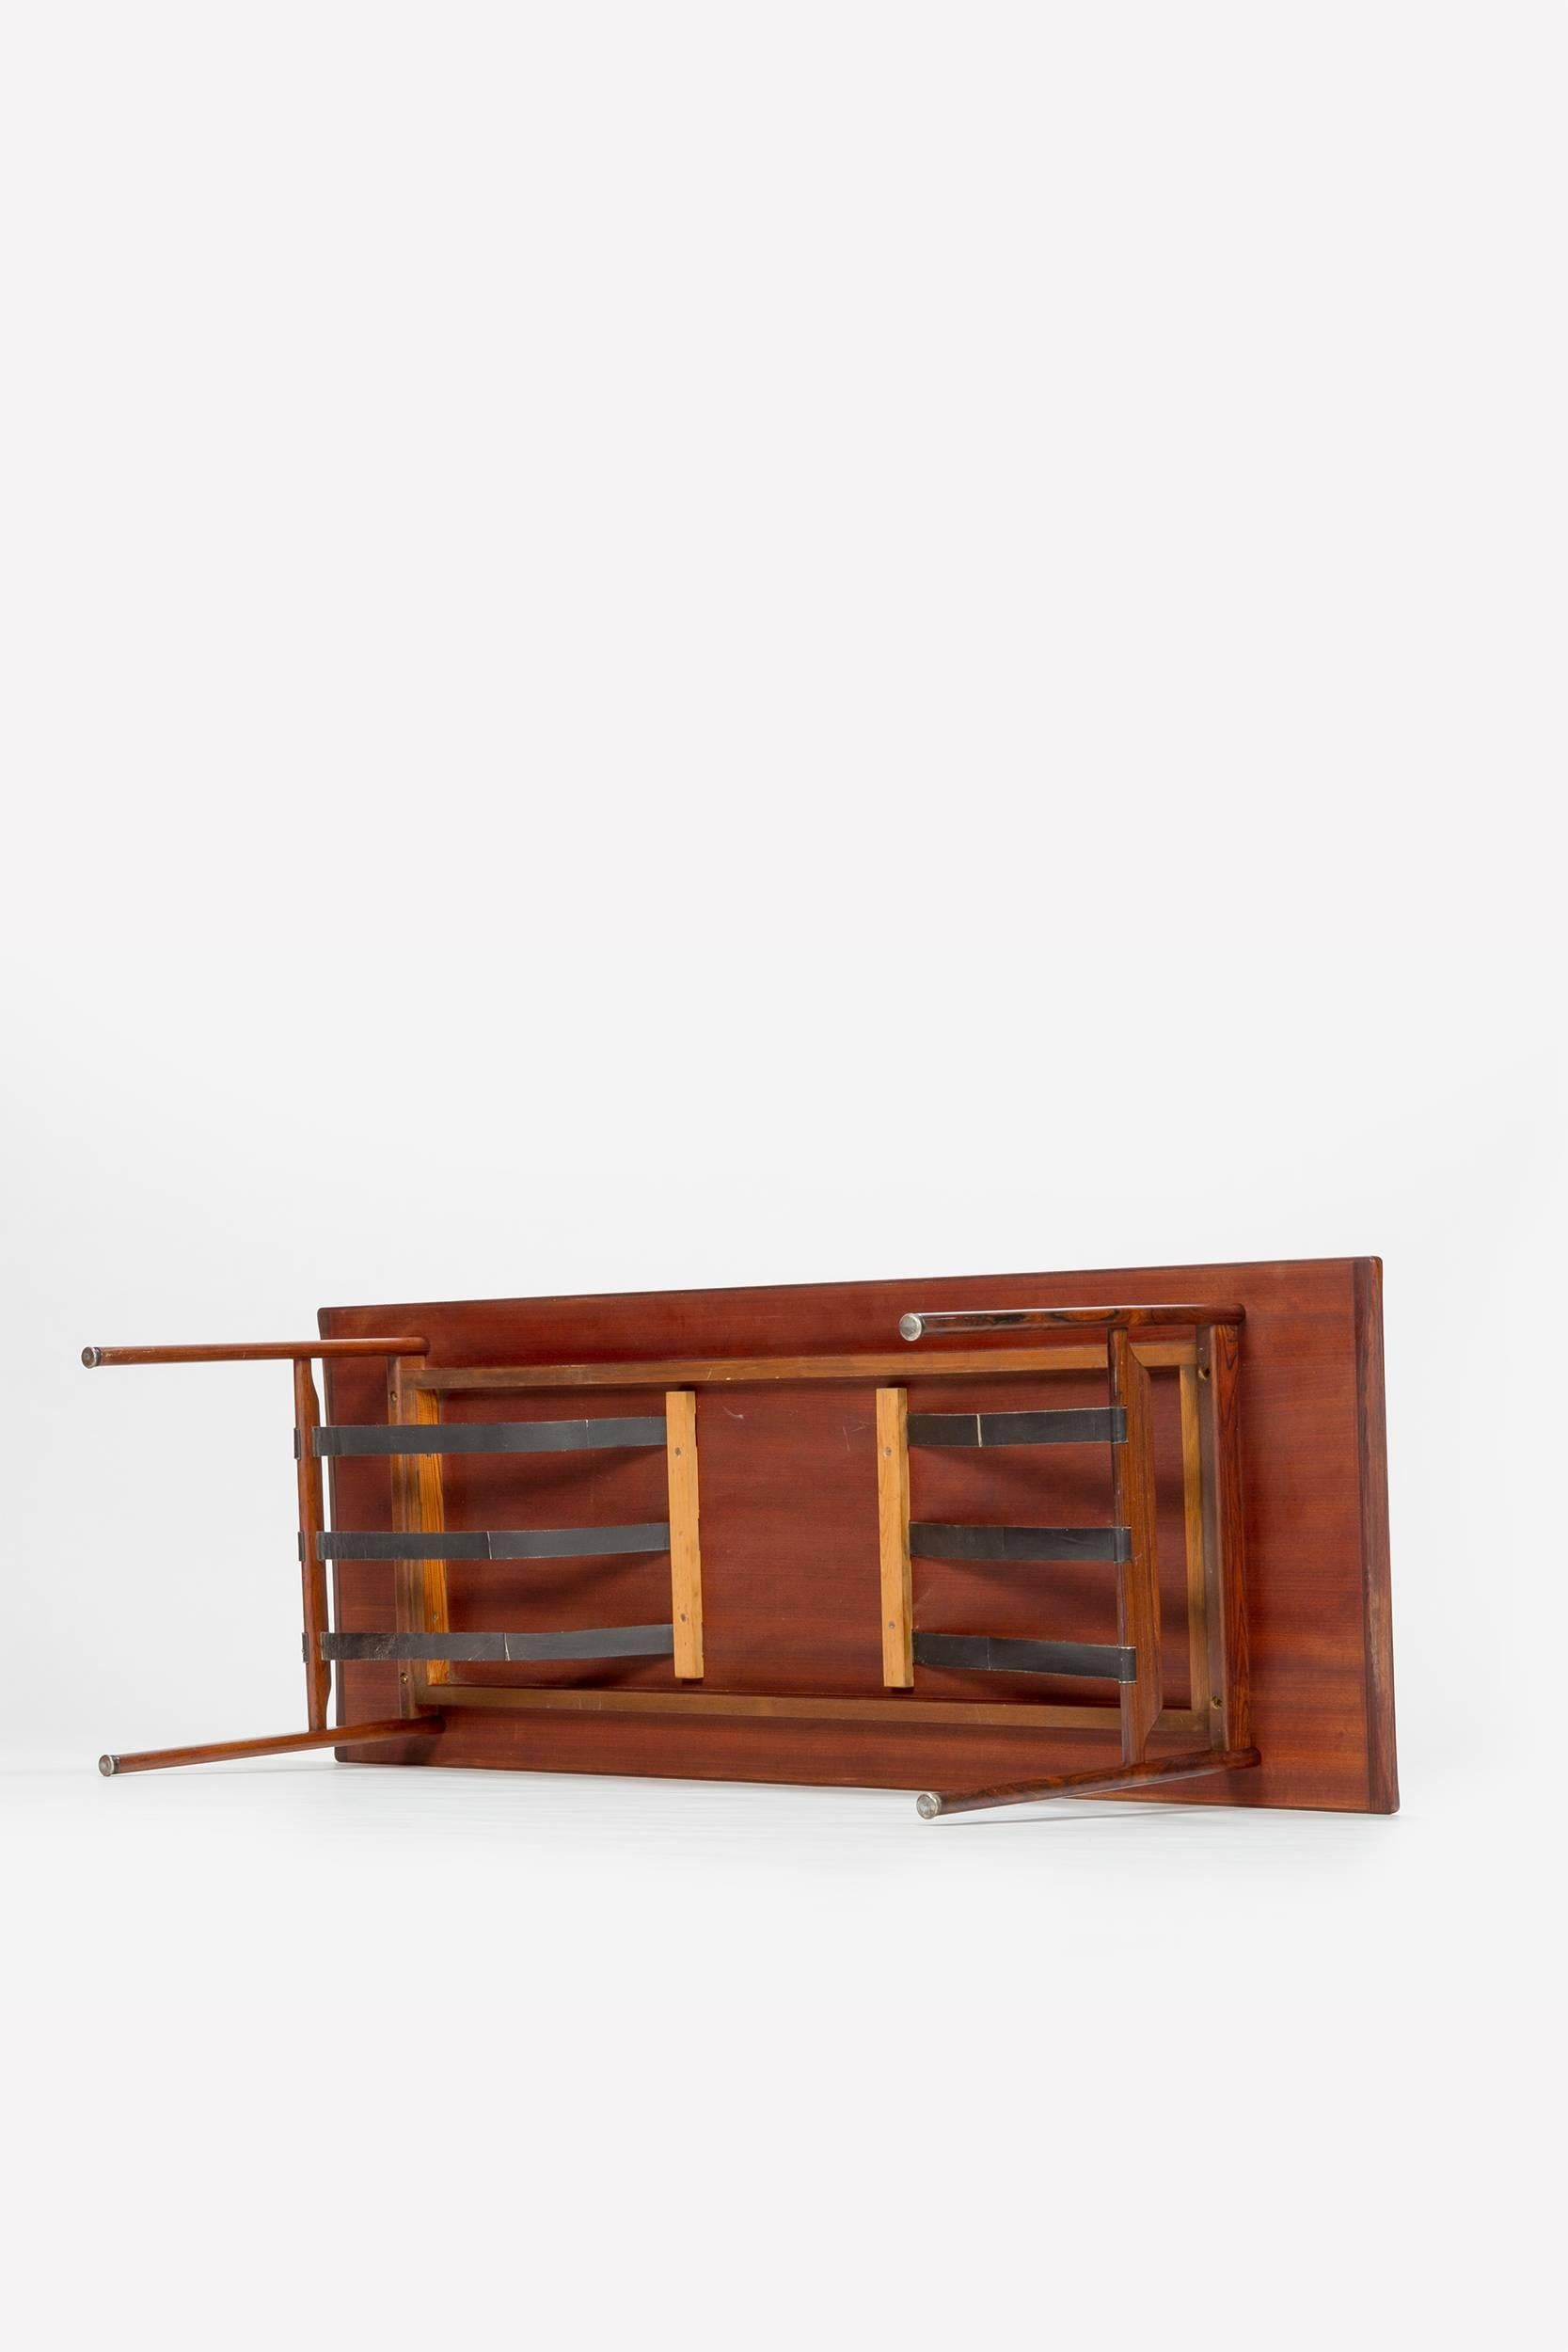 Mid-20th Century Scandinavian Rosewood Coffee Table Leather, 1960s